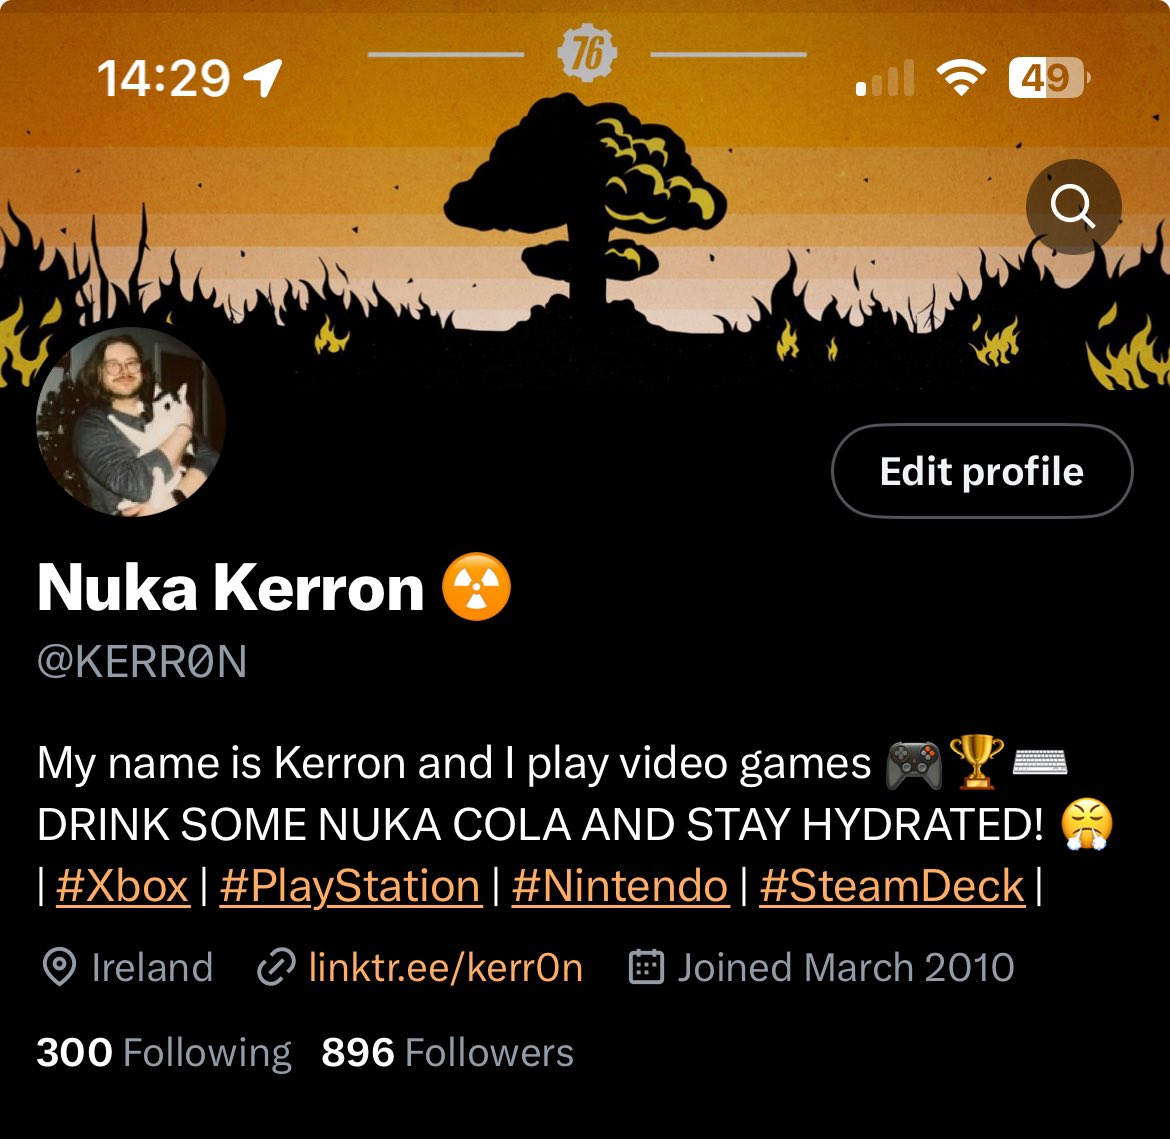 About to hit 900 Followers 😳 THANK YOU once again to all the wonderful people this side of Gaming Twitter for making it such a fun place to interact & talk all things Gaming ❤️ On the road to 1000 now which is crazy! 😭 Planning a giveaway for the big 1K 👀